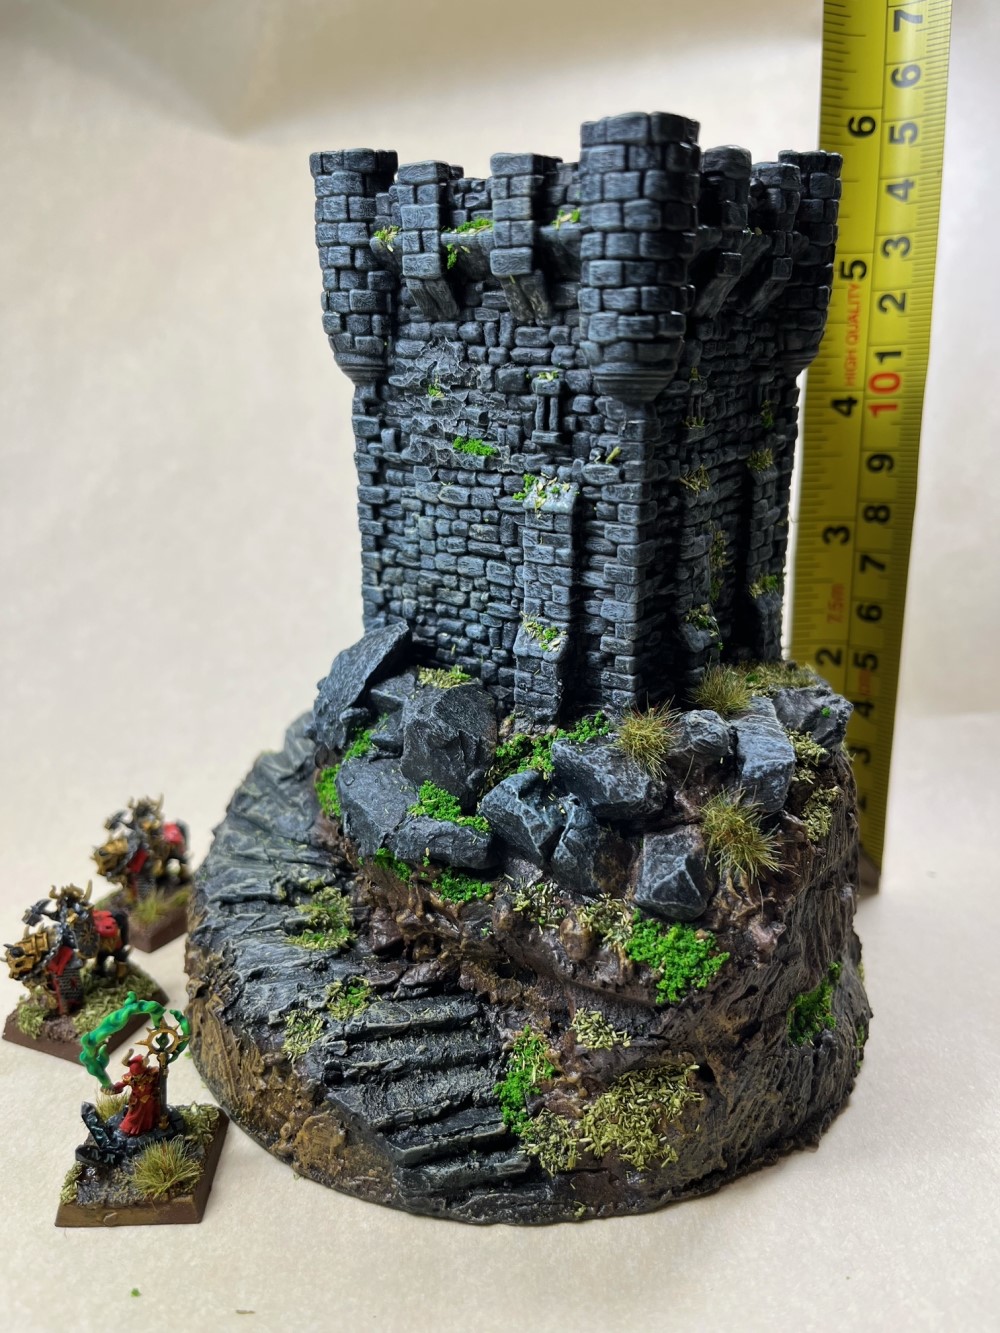 Sharp Rock Formations, 3D Printed Tabletop RPG Scenery and Wargame Terrain  for 28mm Miniatures : : Toys